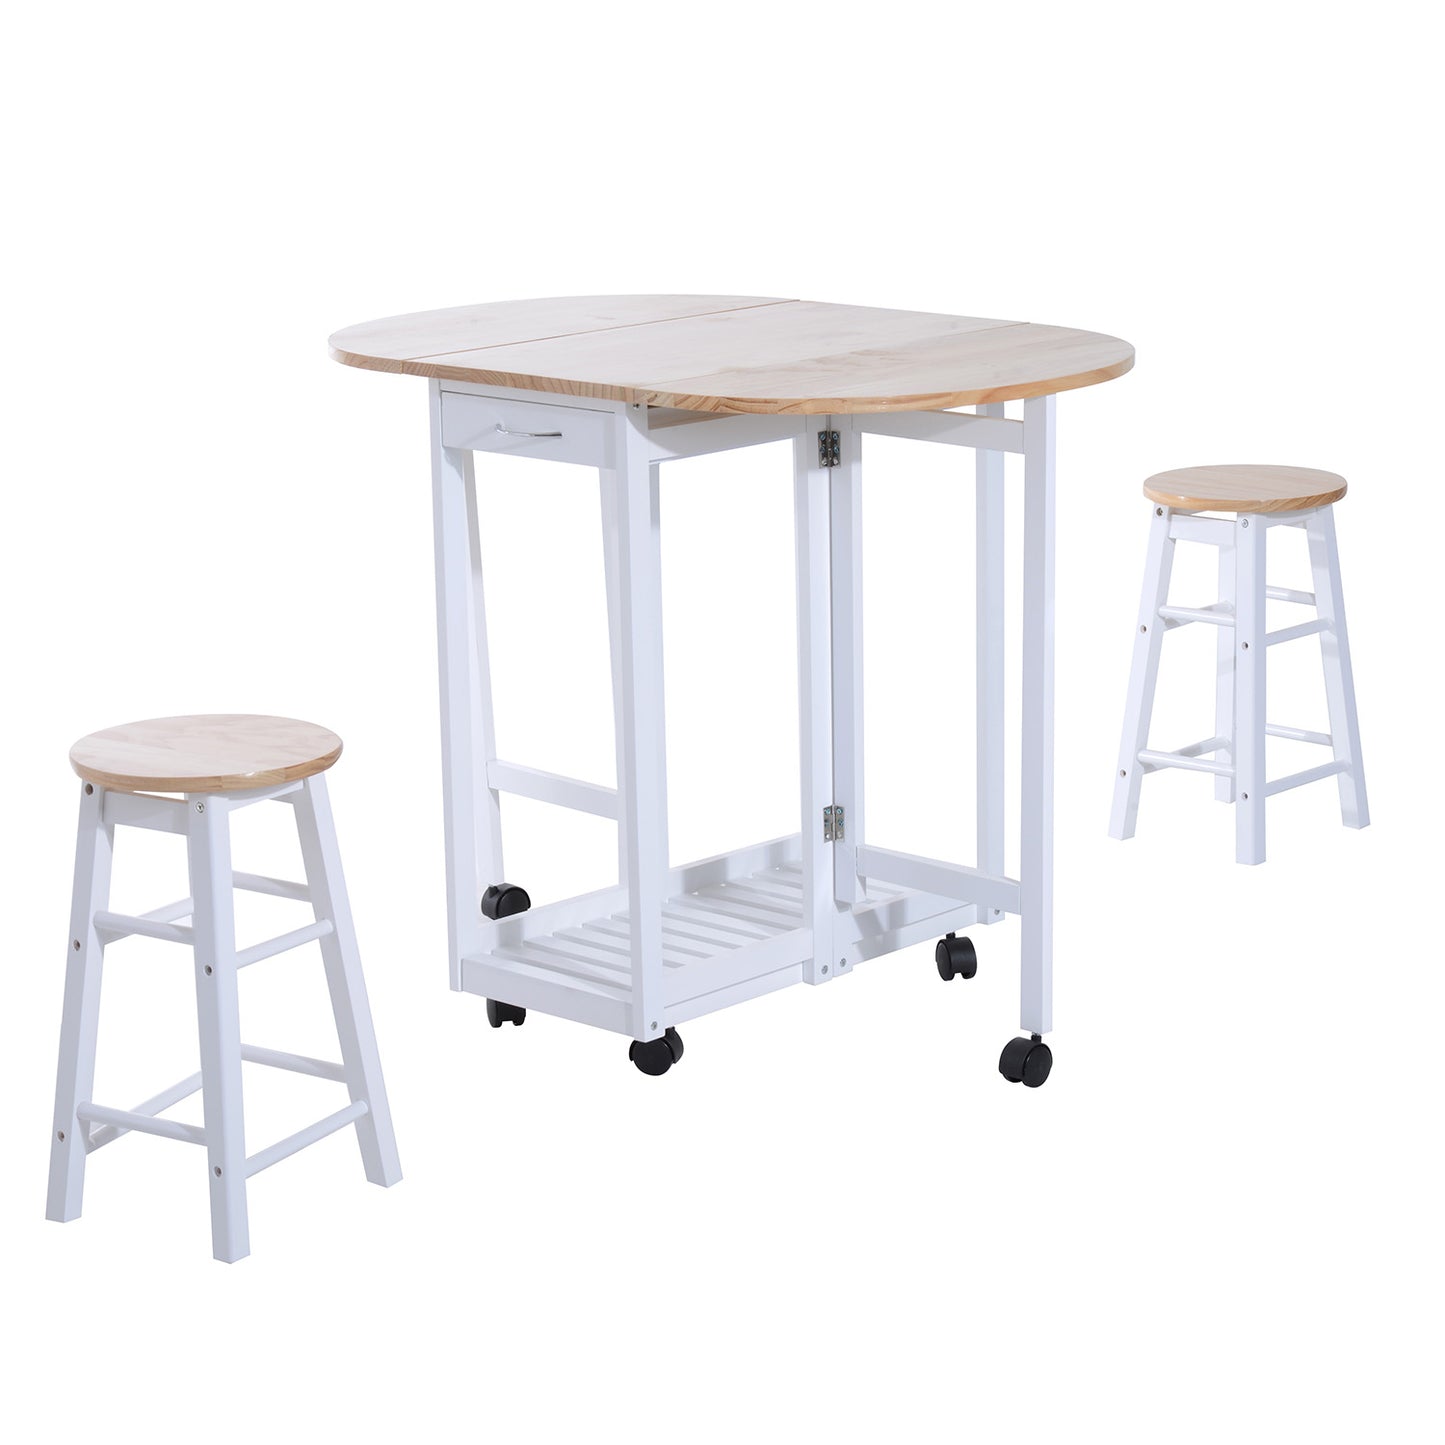 HOMCOM Pine Wood 3-Piece Compact Folding Dining Table with Stools White